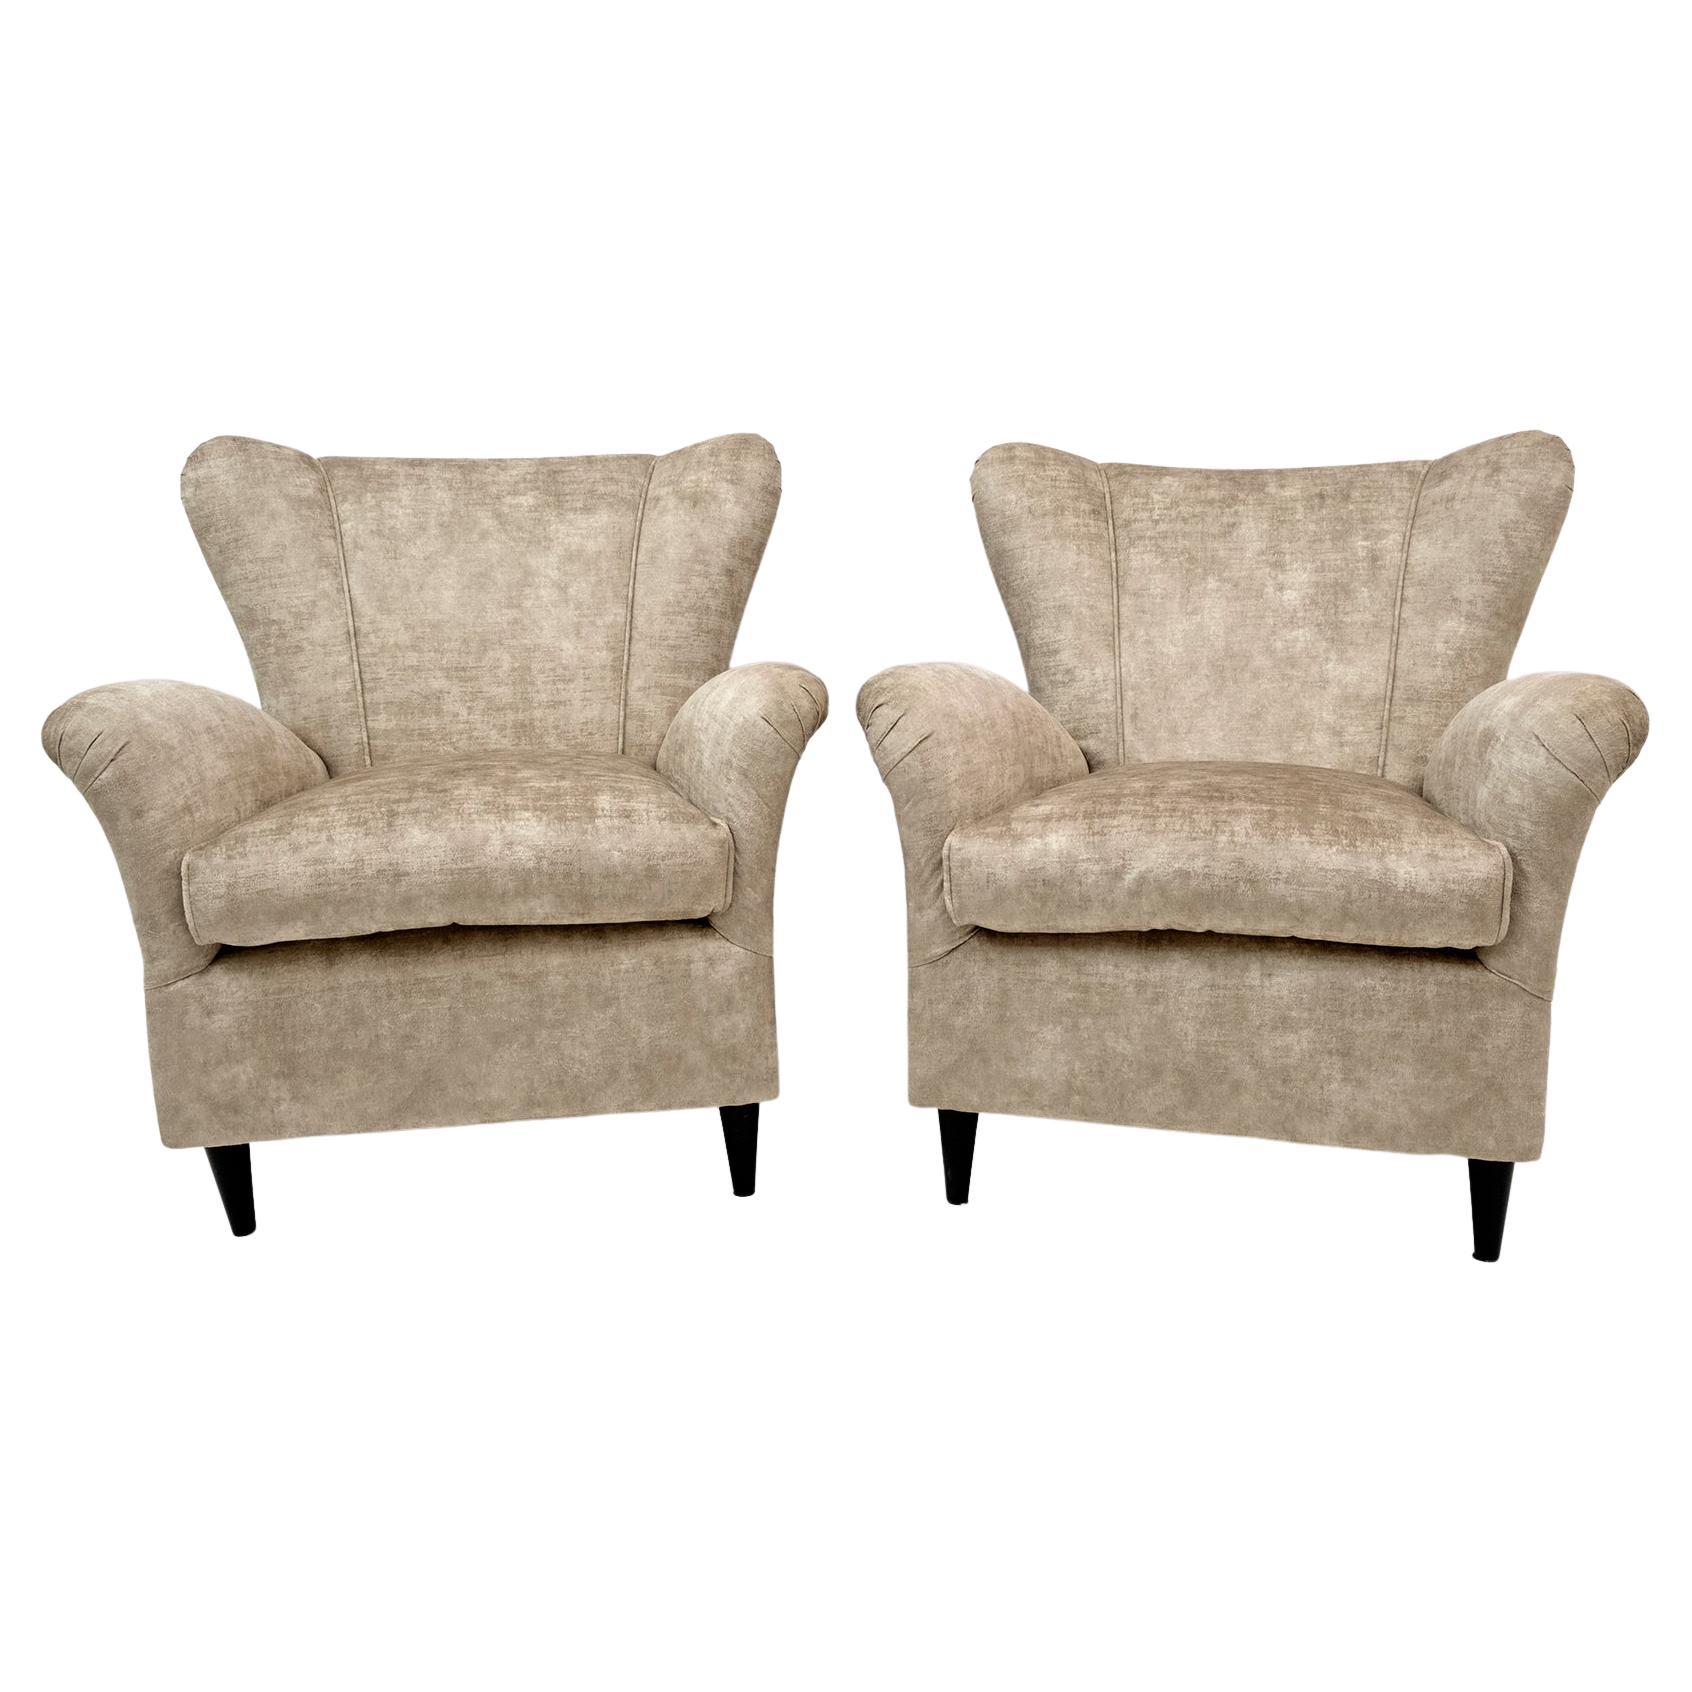 Attributed Gio Ponti Mid-Century Modern Italian Velvet Armchairs for ISA, Pair For Sale